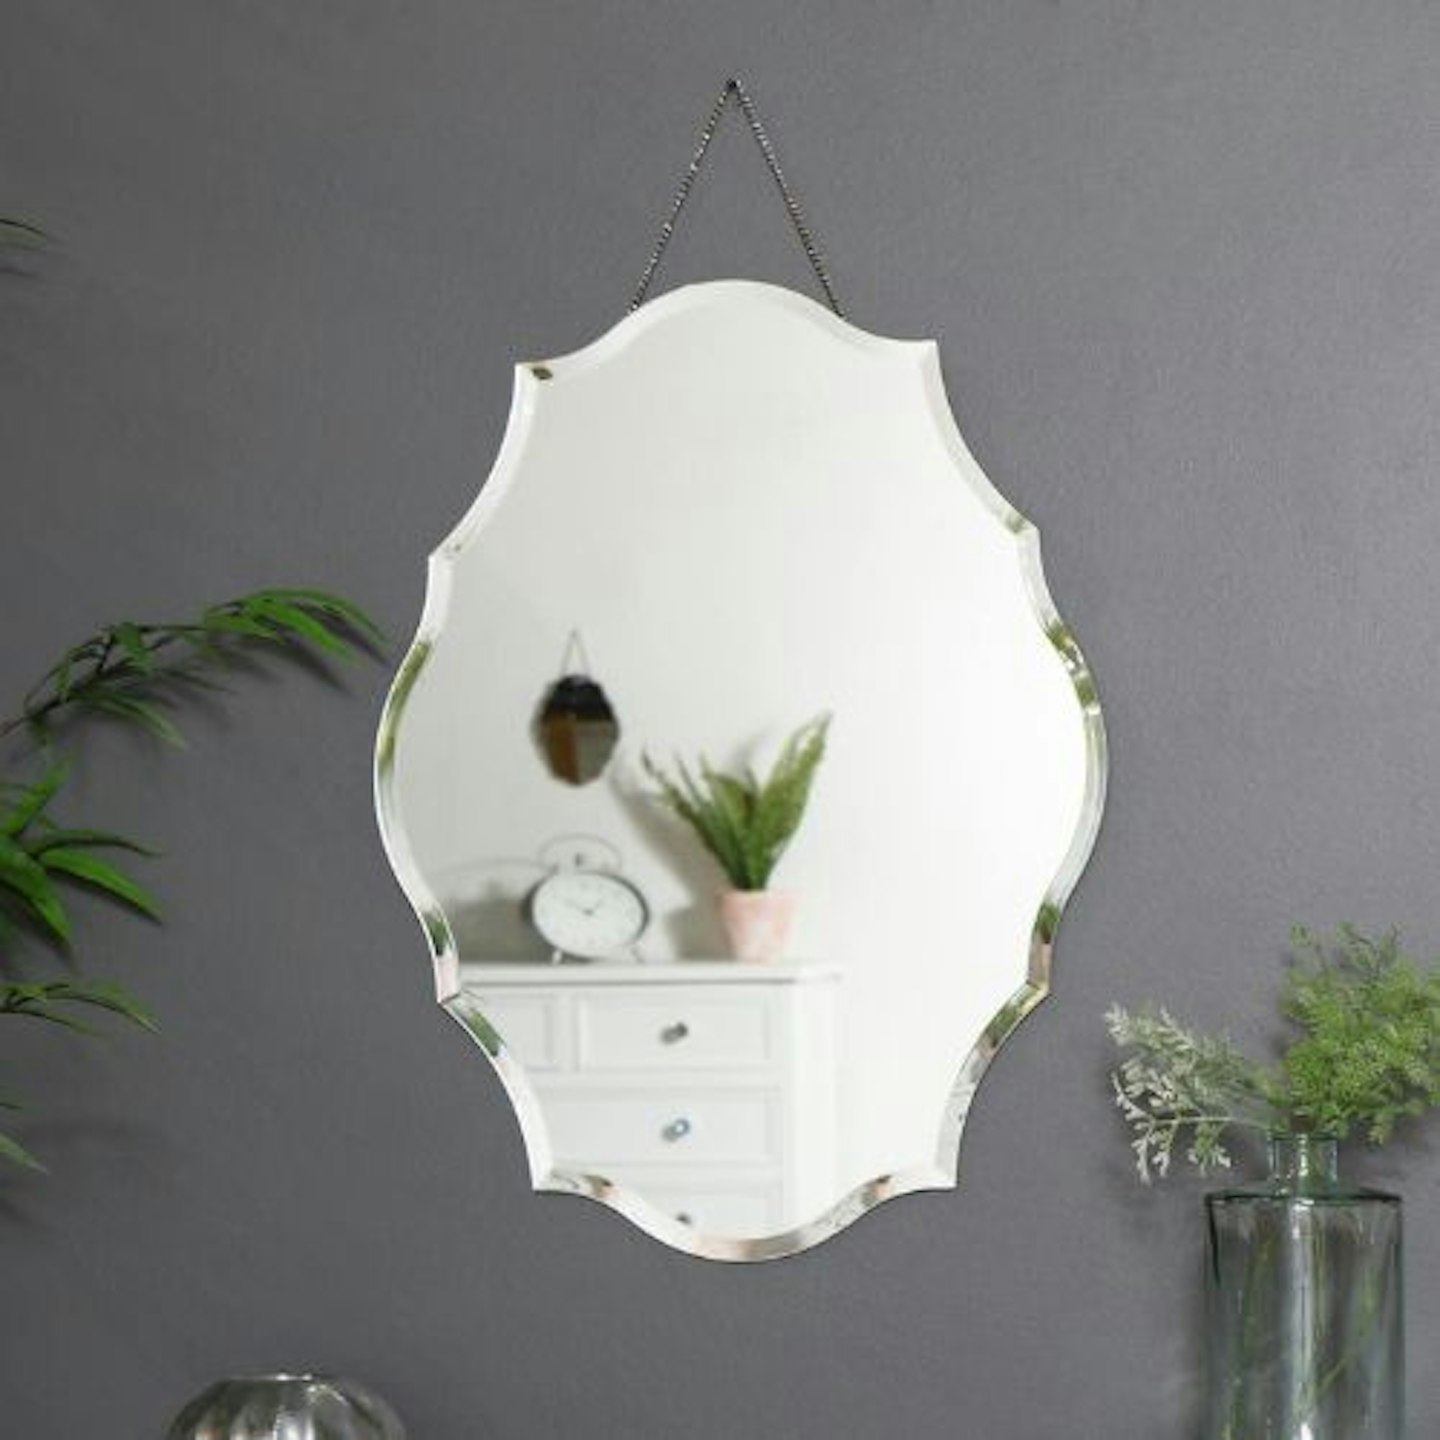 https://www.amazon.co.uk/Melody-Maison-Ornate-Frameless-Bevelled/dp/B07P8N46MP/?tag=graziarticle659-21